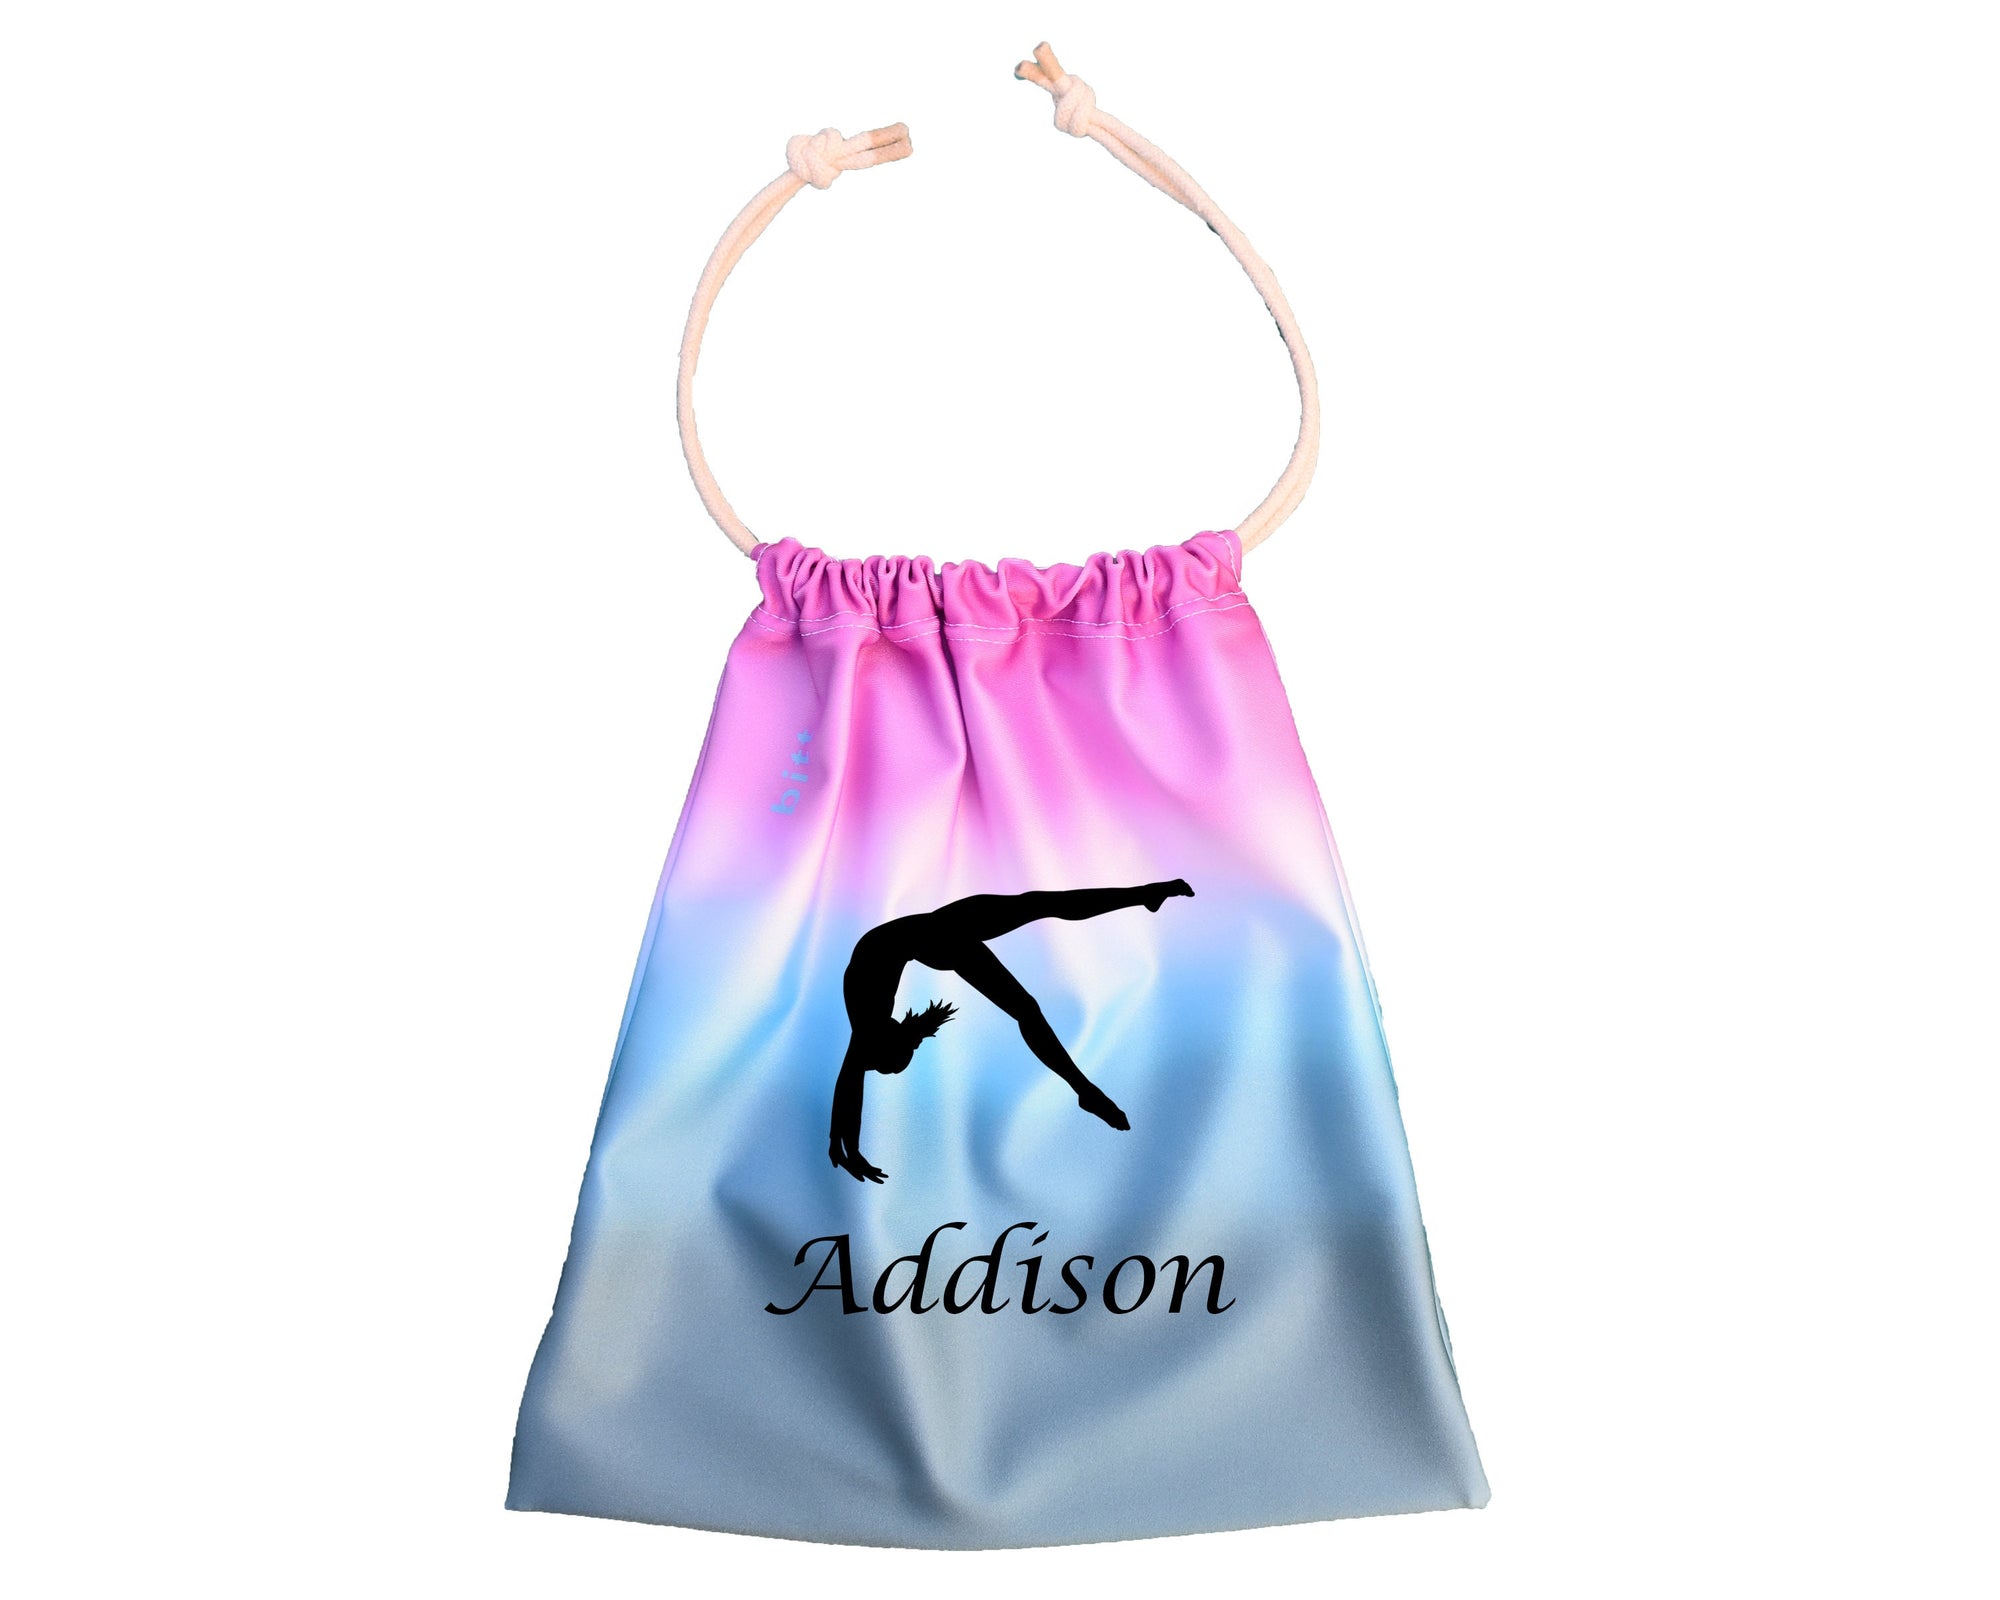 Personalized Gymnastics Grip Bag in Teal Pink Ombre with Back Handspring